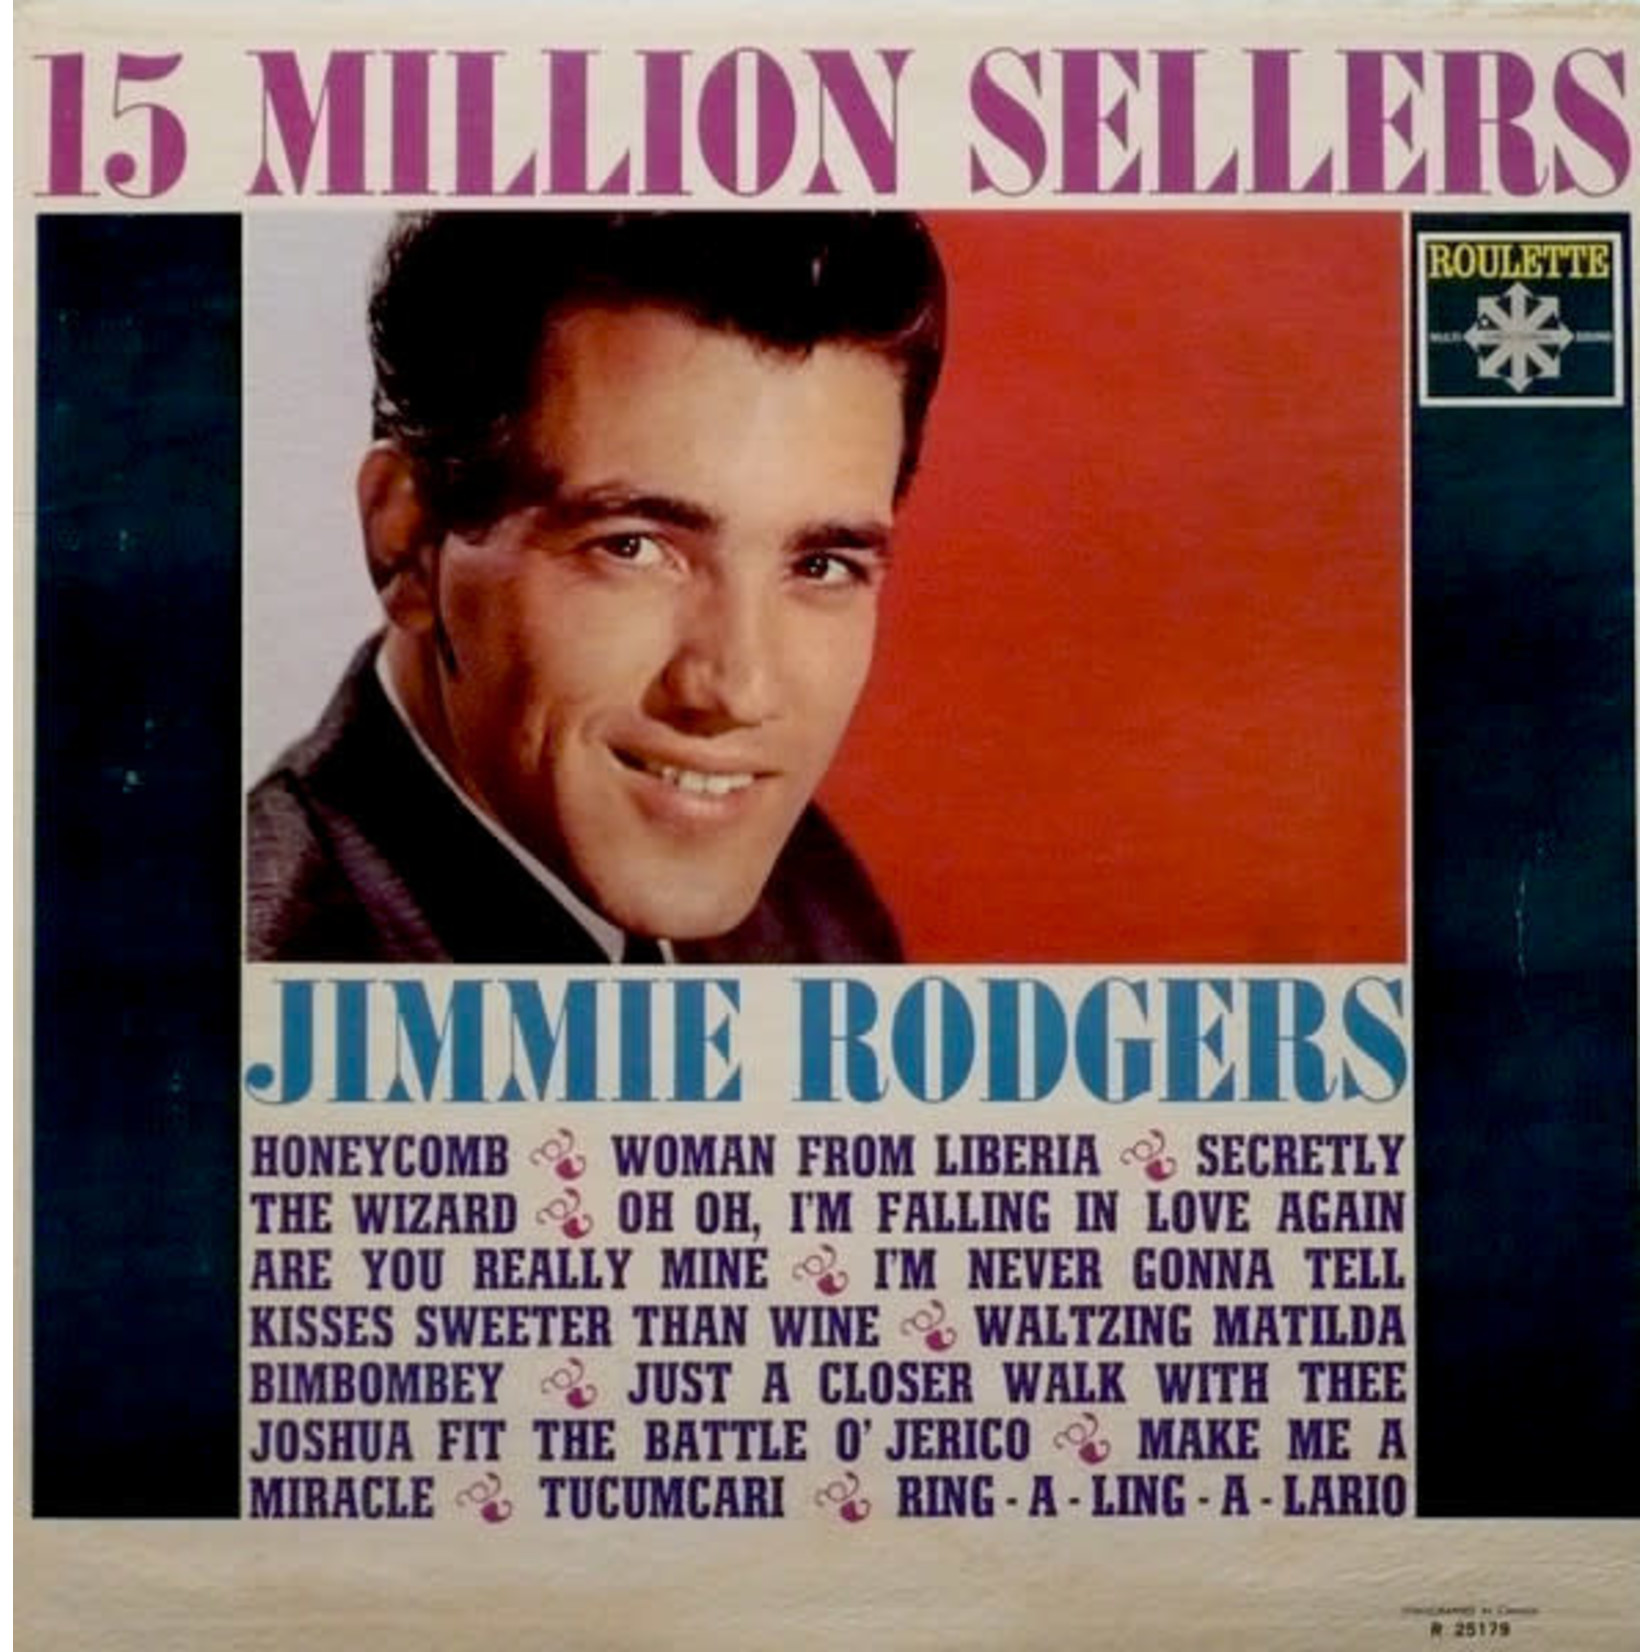 [Discontinued] Jimmie Rodgers - 15 Million Sellers